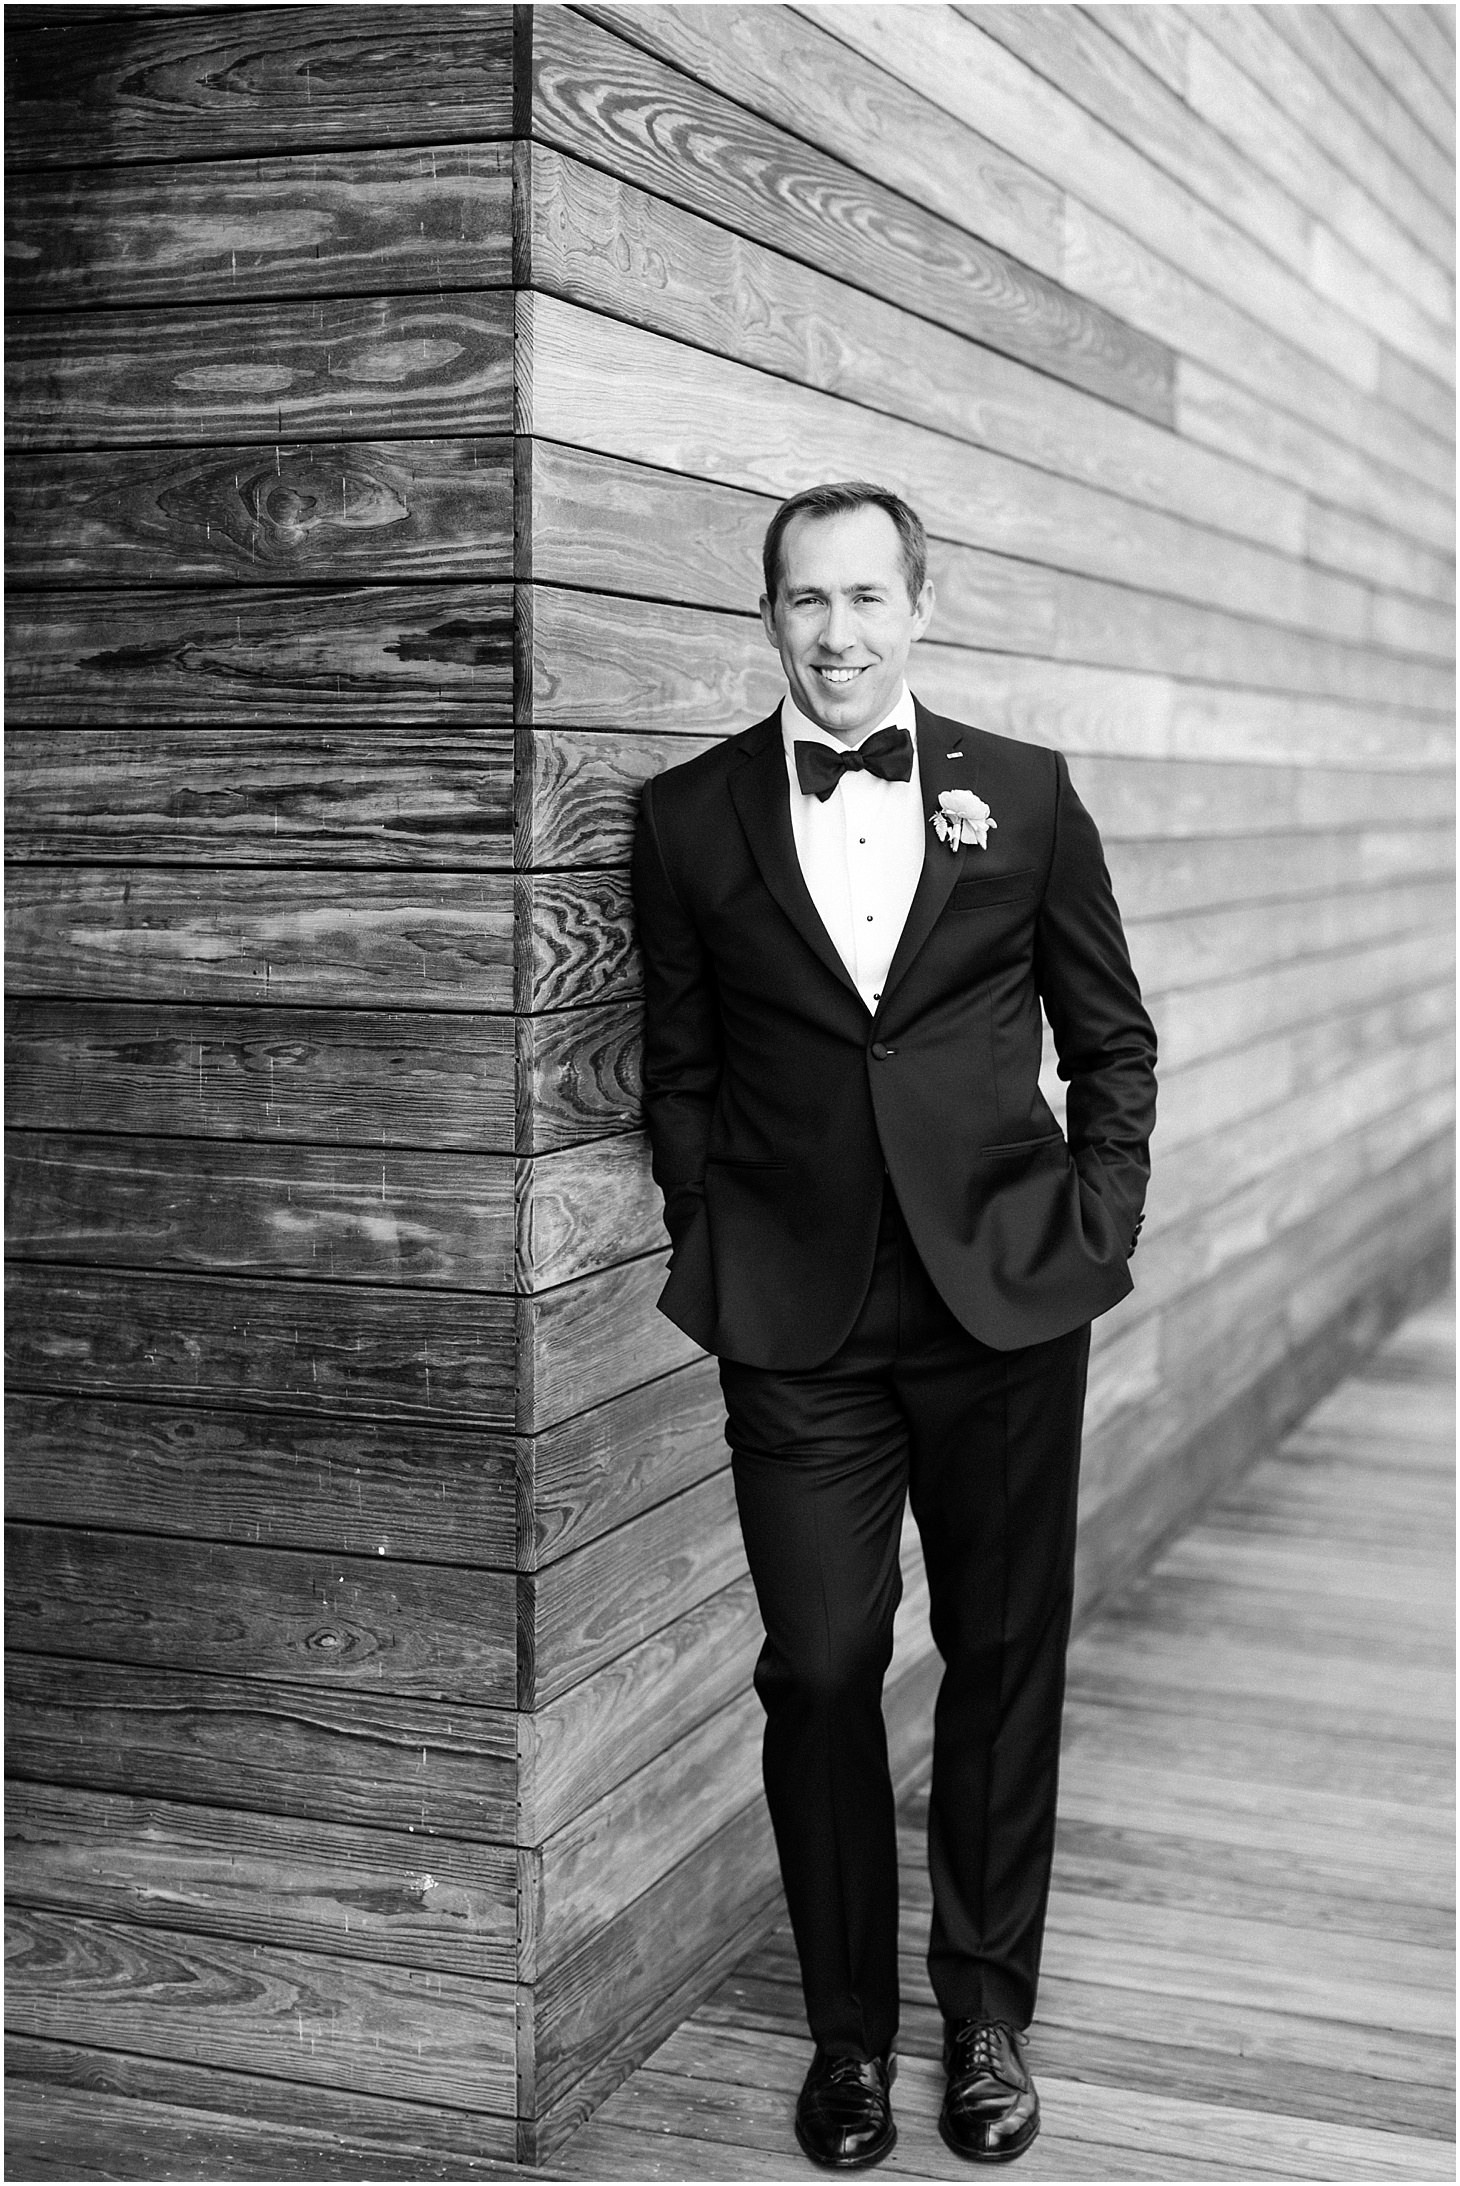 Groom Portrait in Ratio Suit Tuxedo | Chic and Modern Interfaith Wedding at District Winery in Washington, DC | Sarah Bradshaw Photography